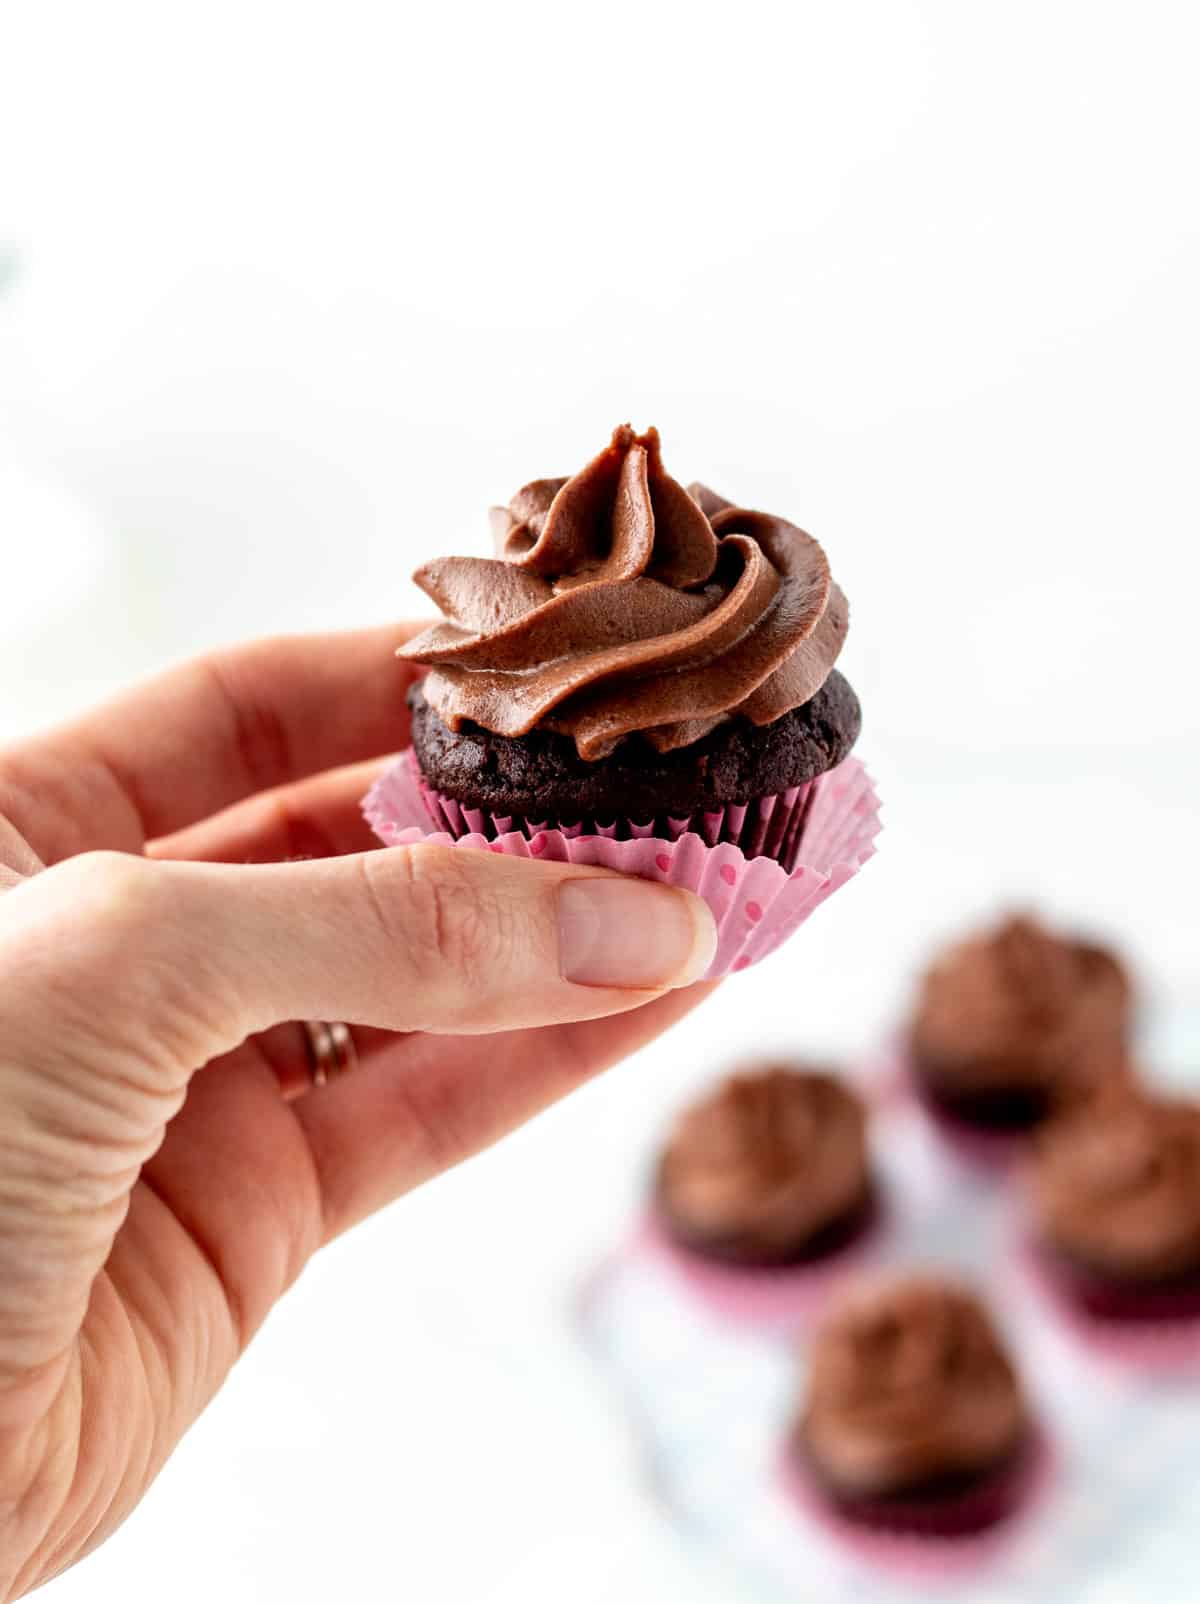 A hand holding up a mini cupcake with chocolate date frosting.